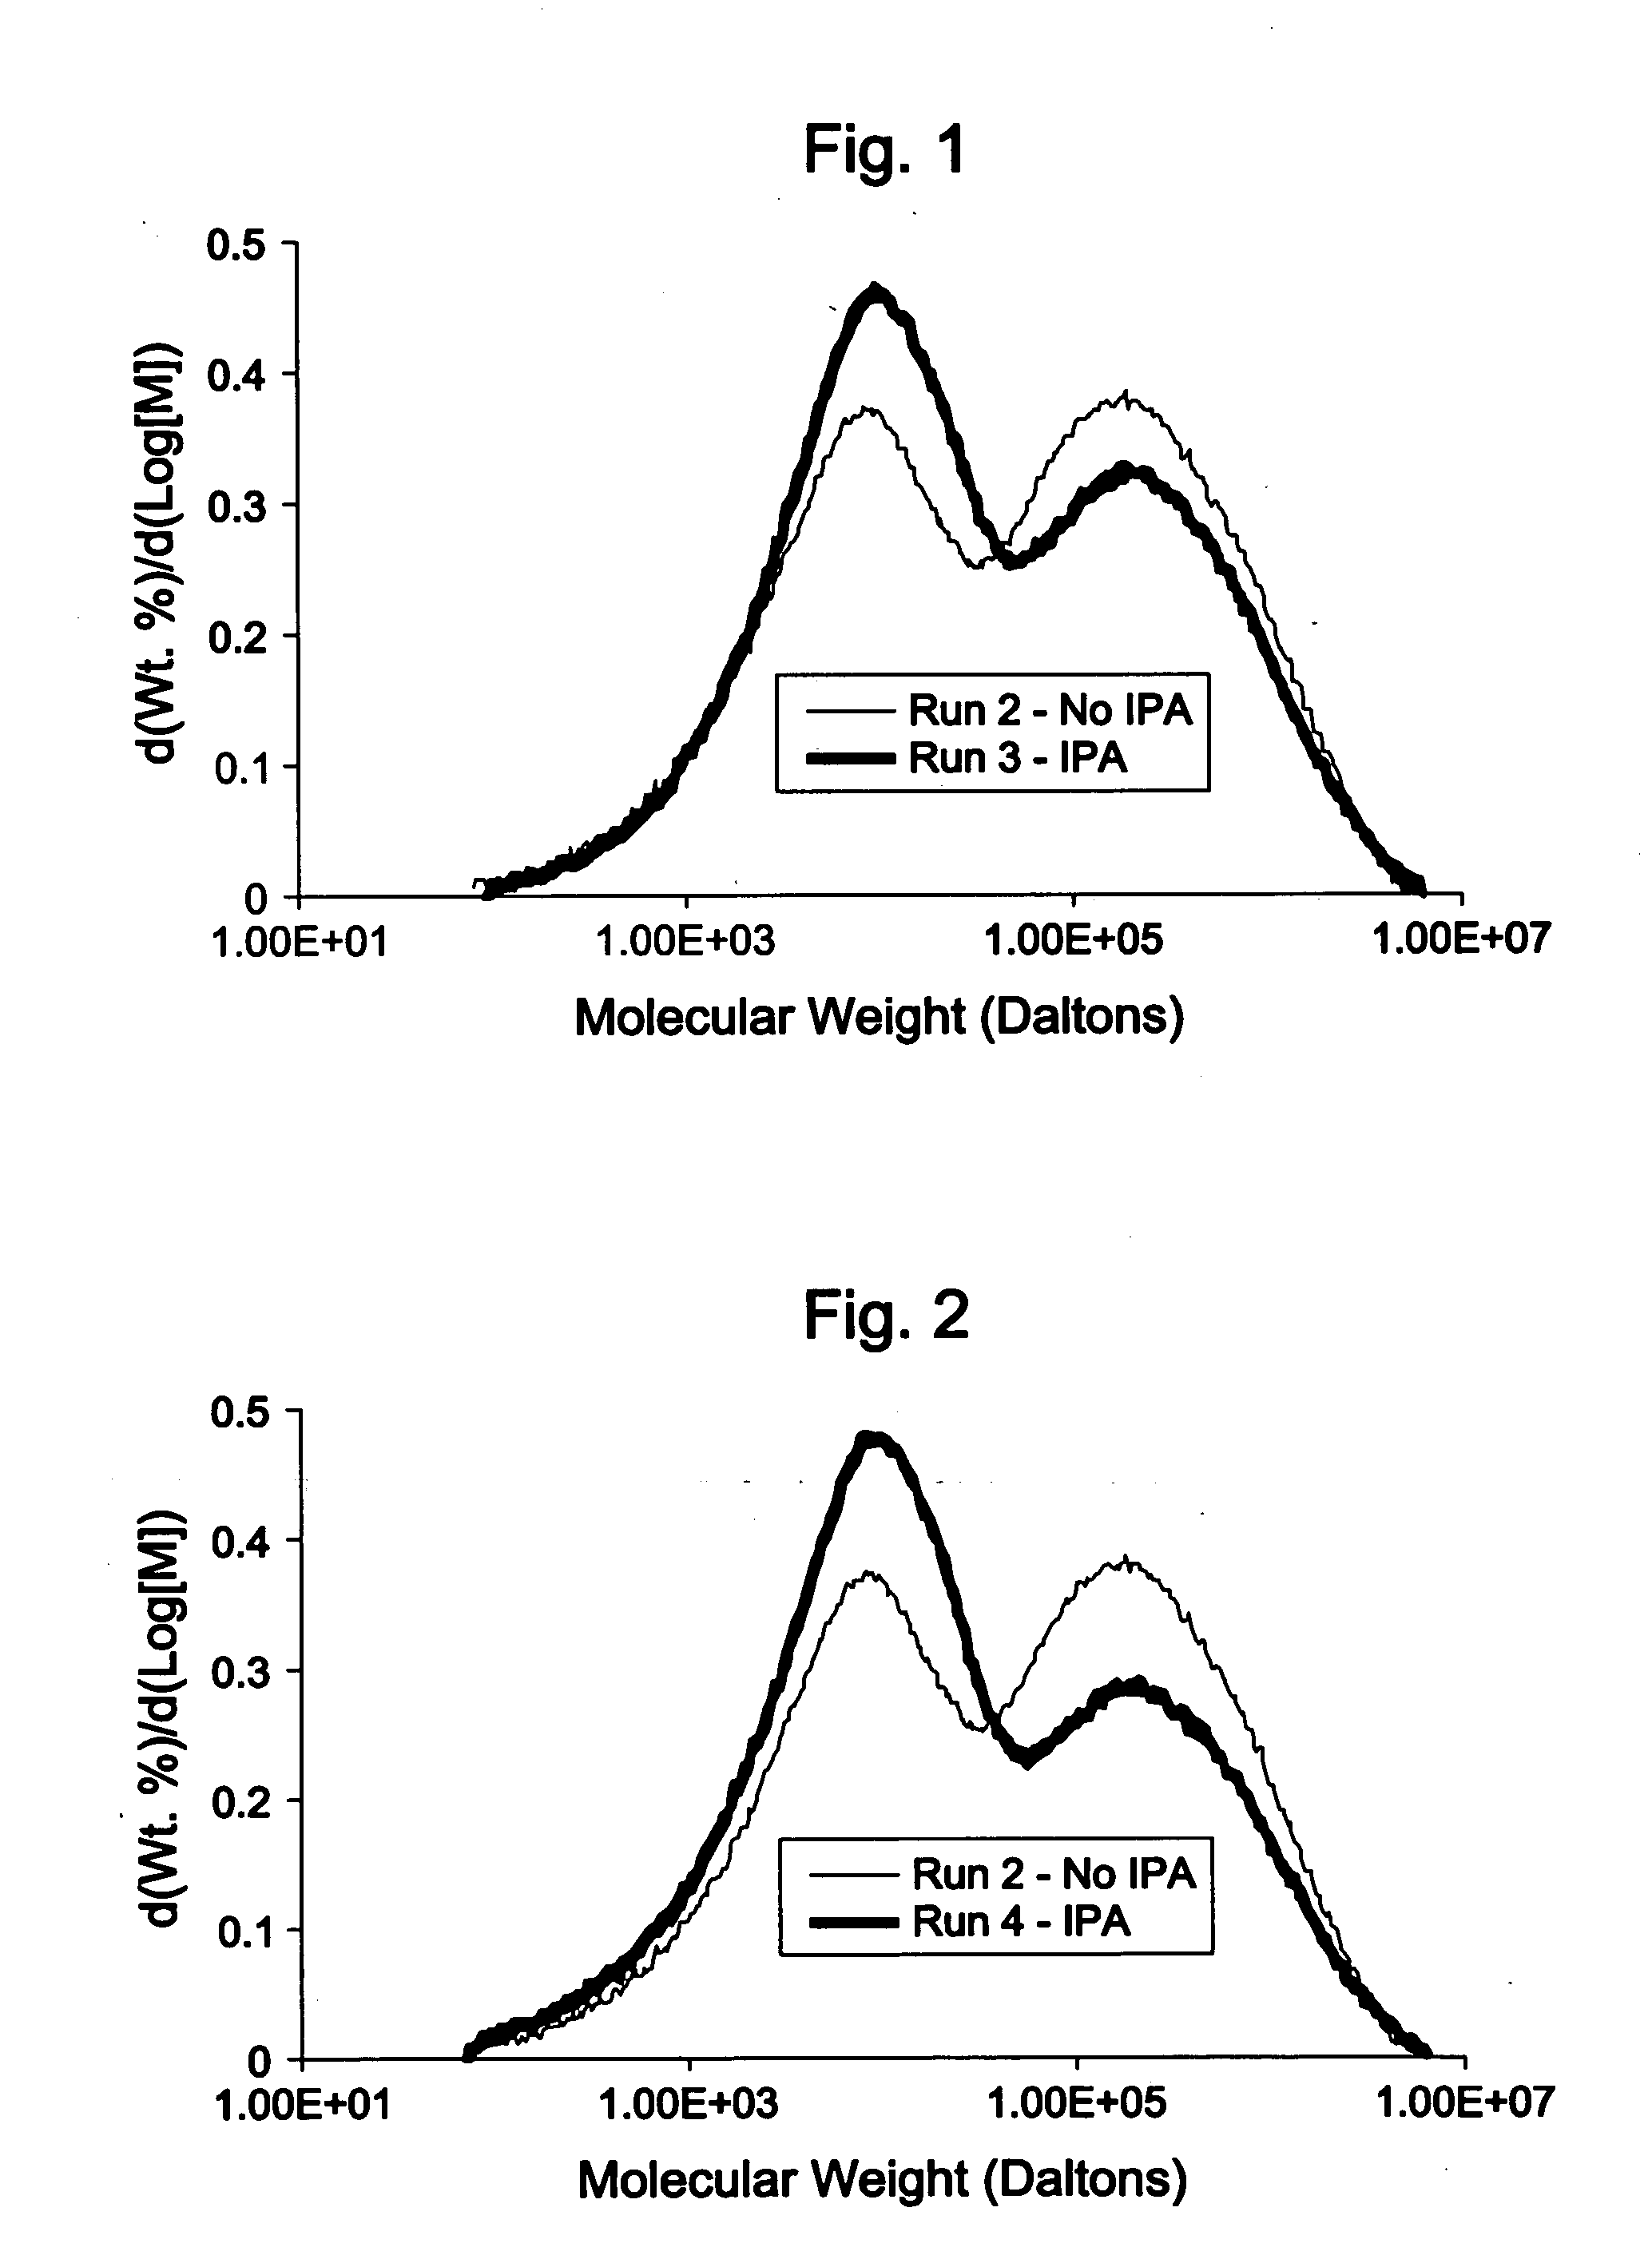 Polymerization process and control of polymer composition properties